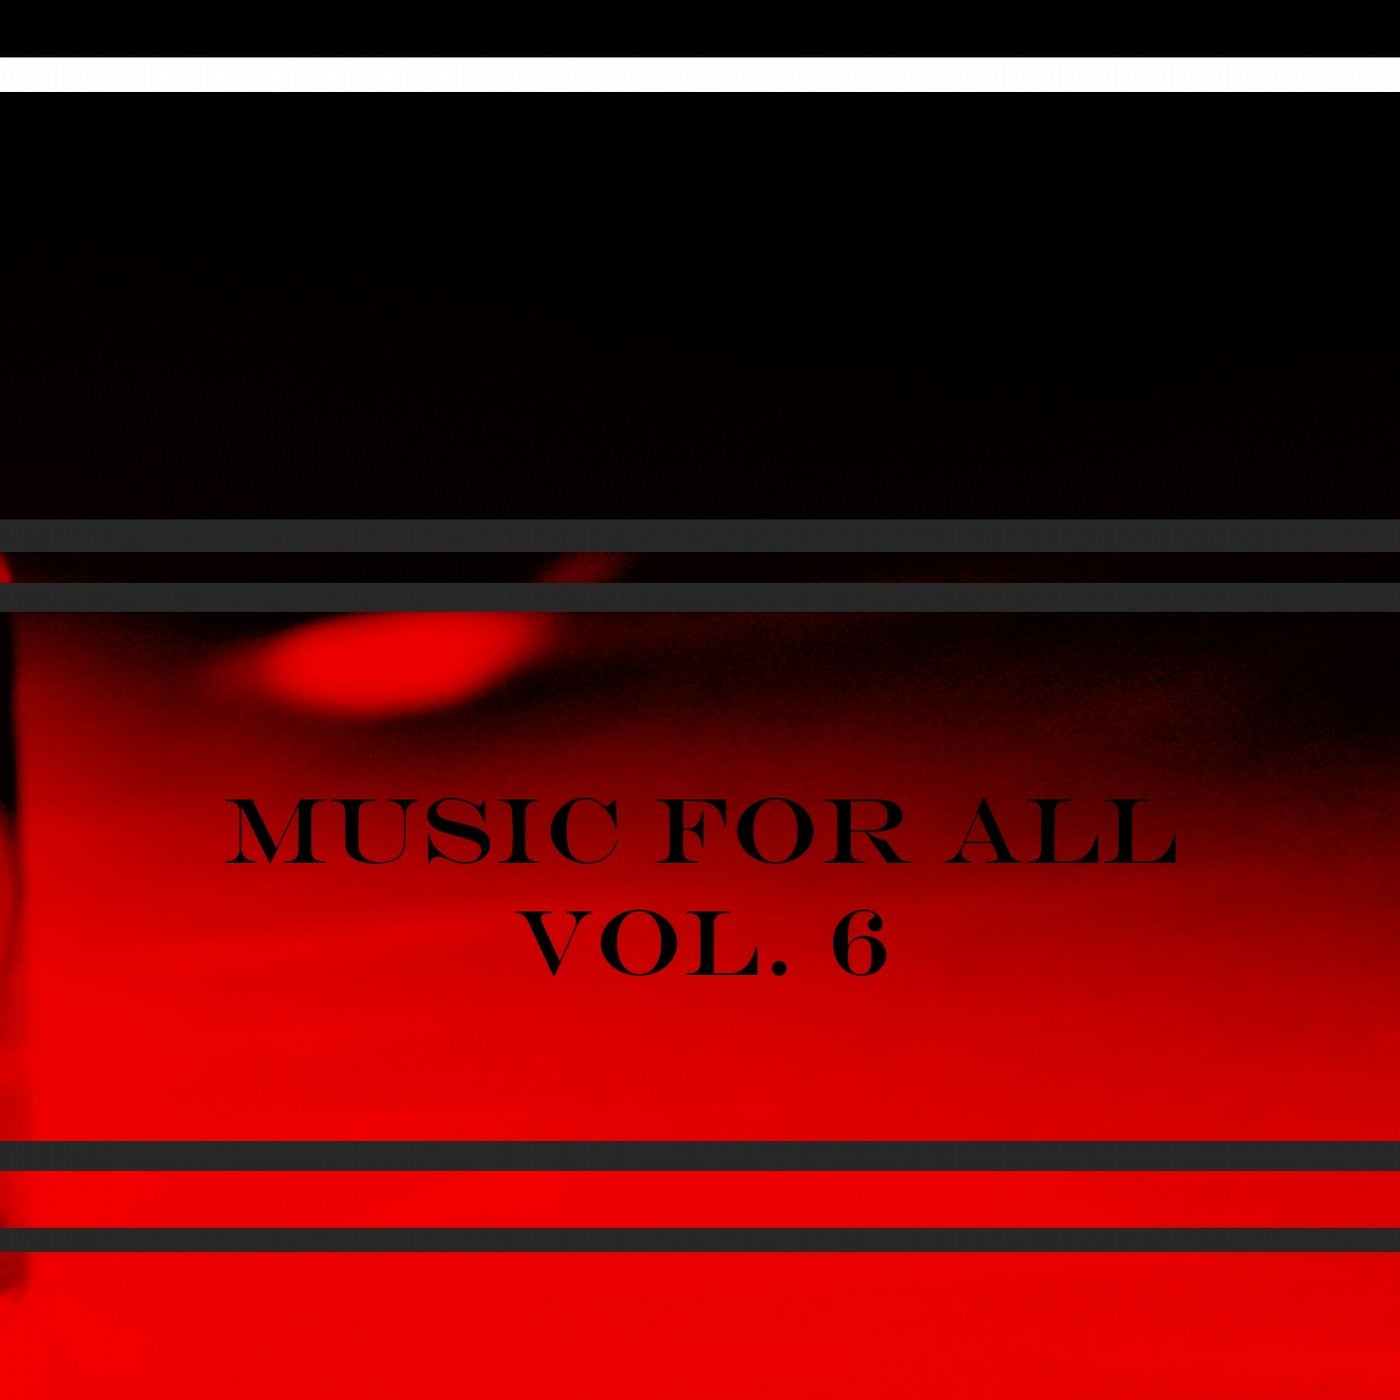 Music for All Vol. 6